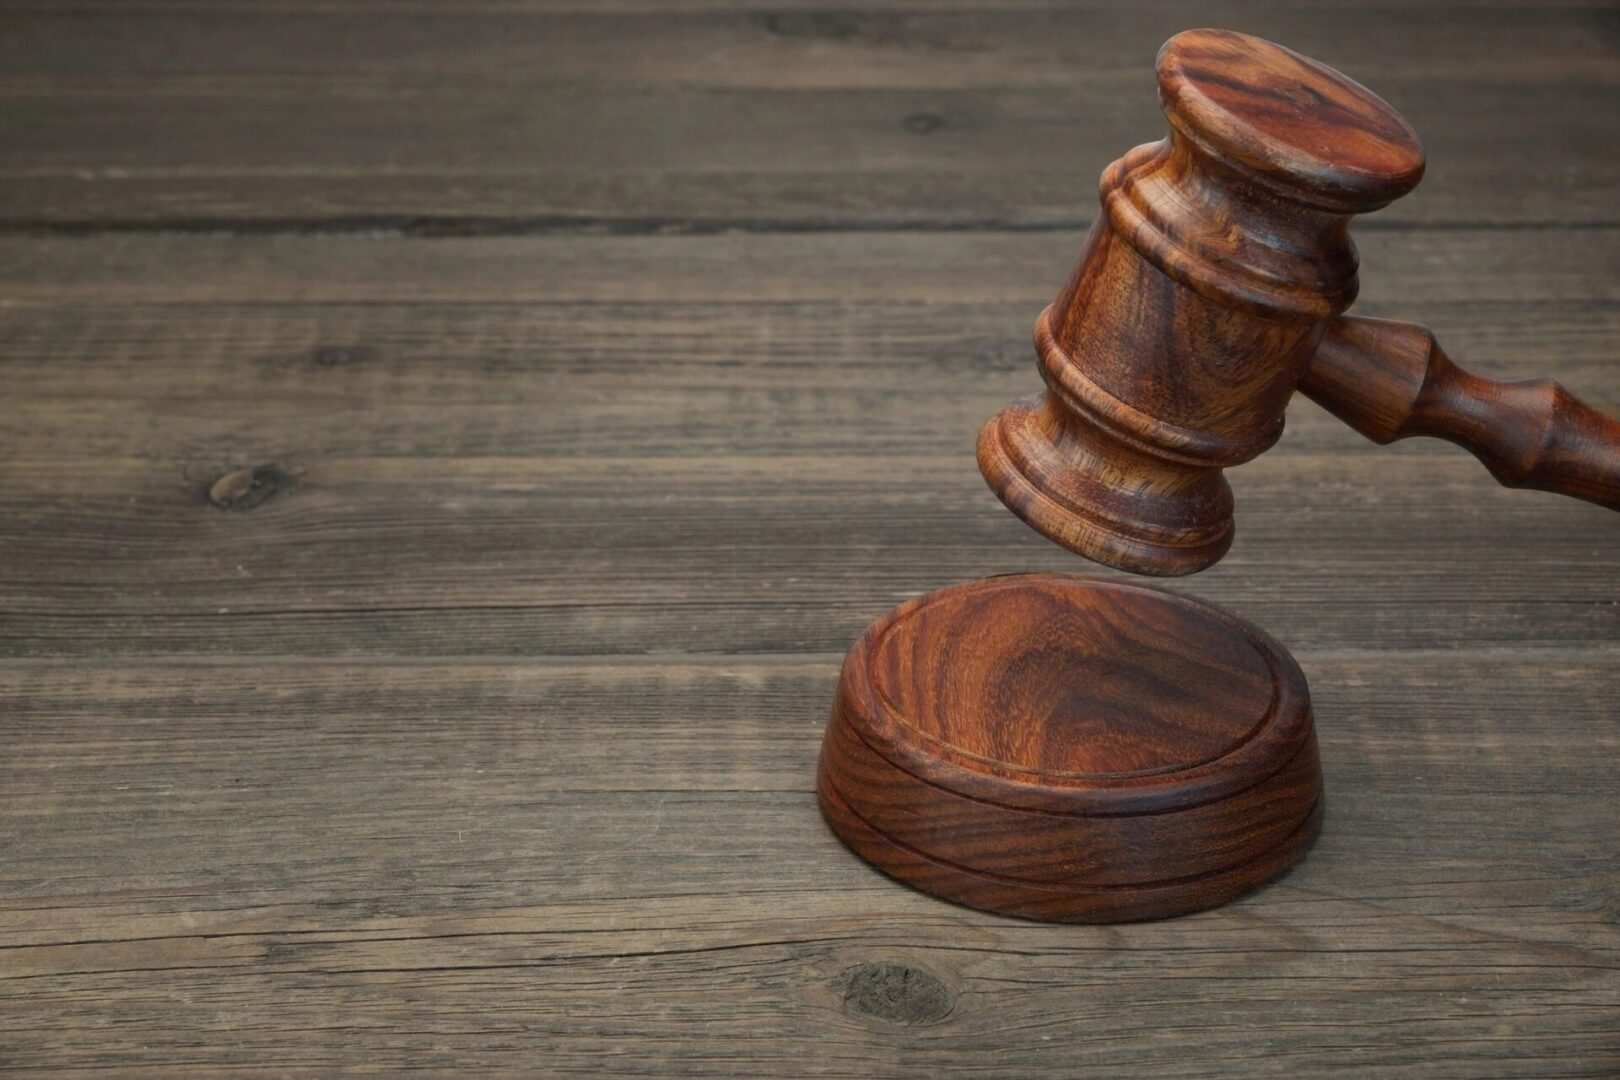 A wooden judge 's gavel on top of a table.